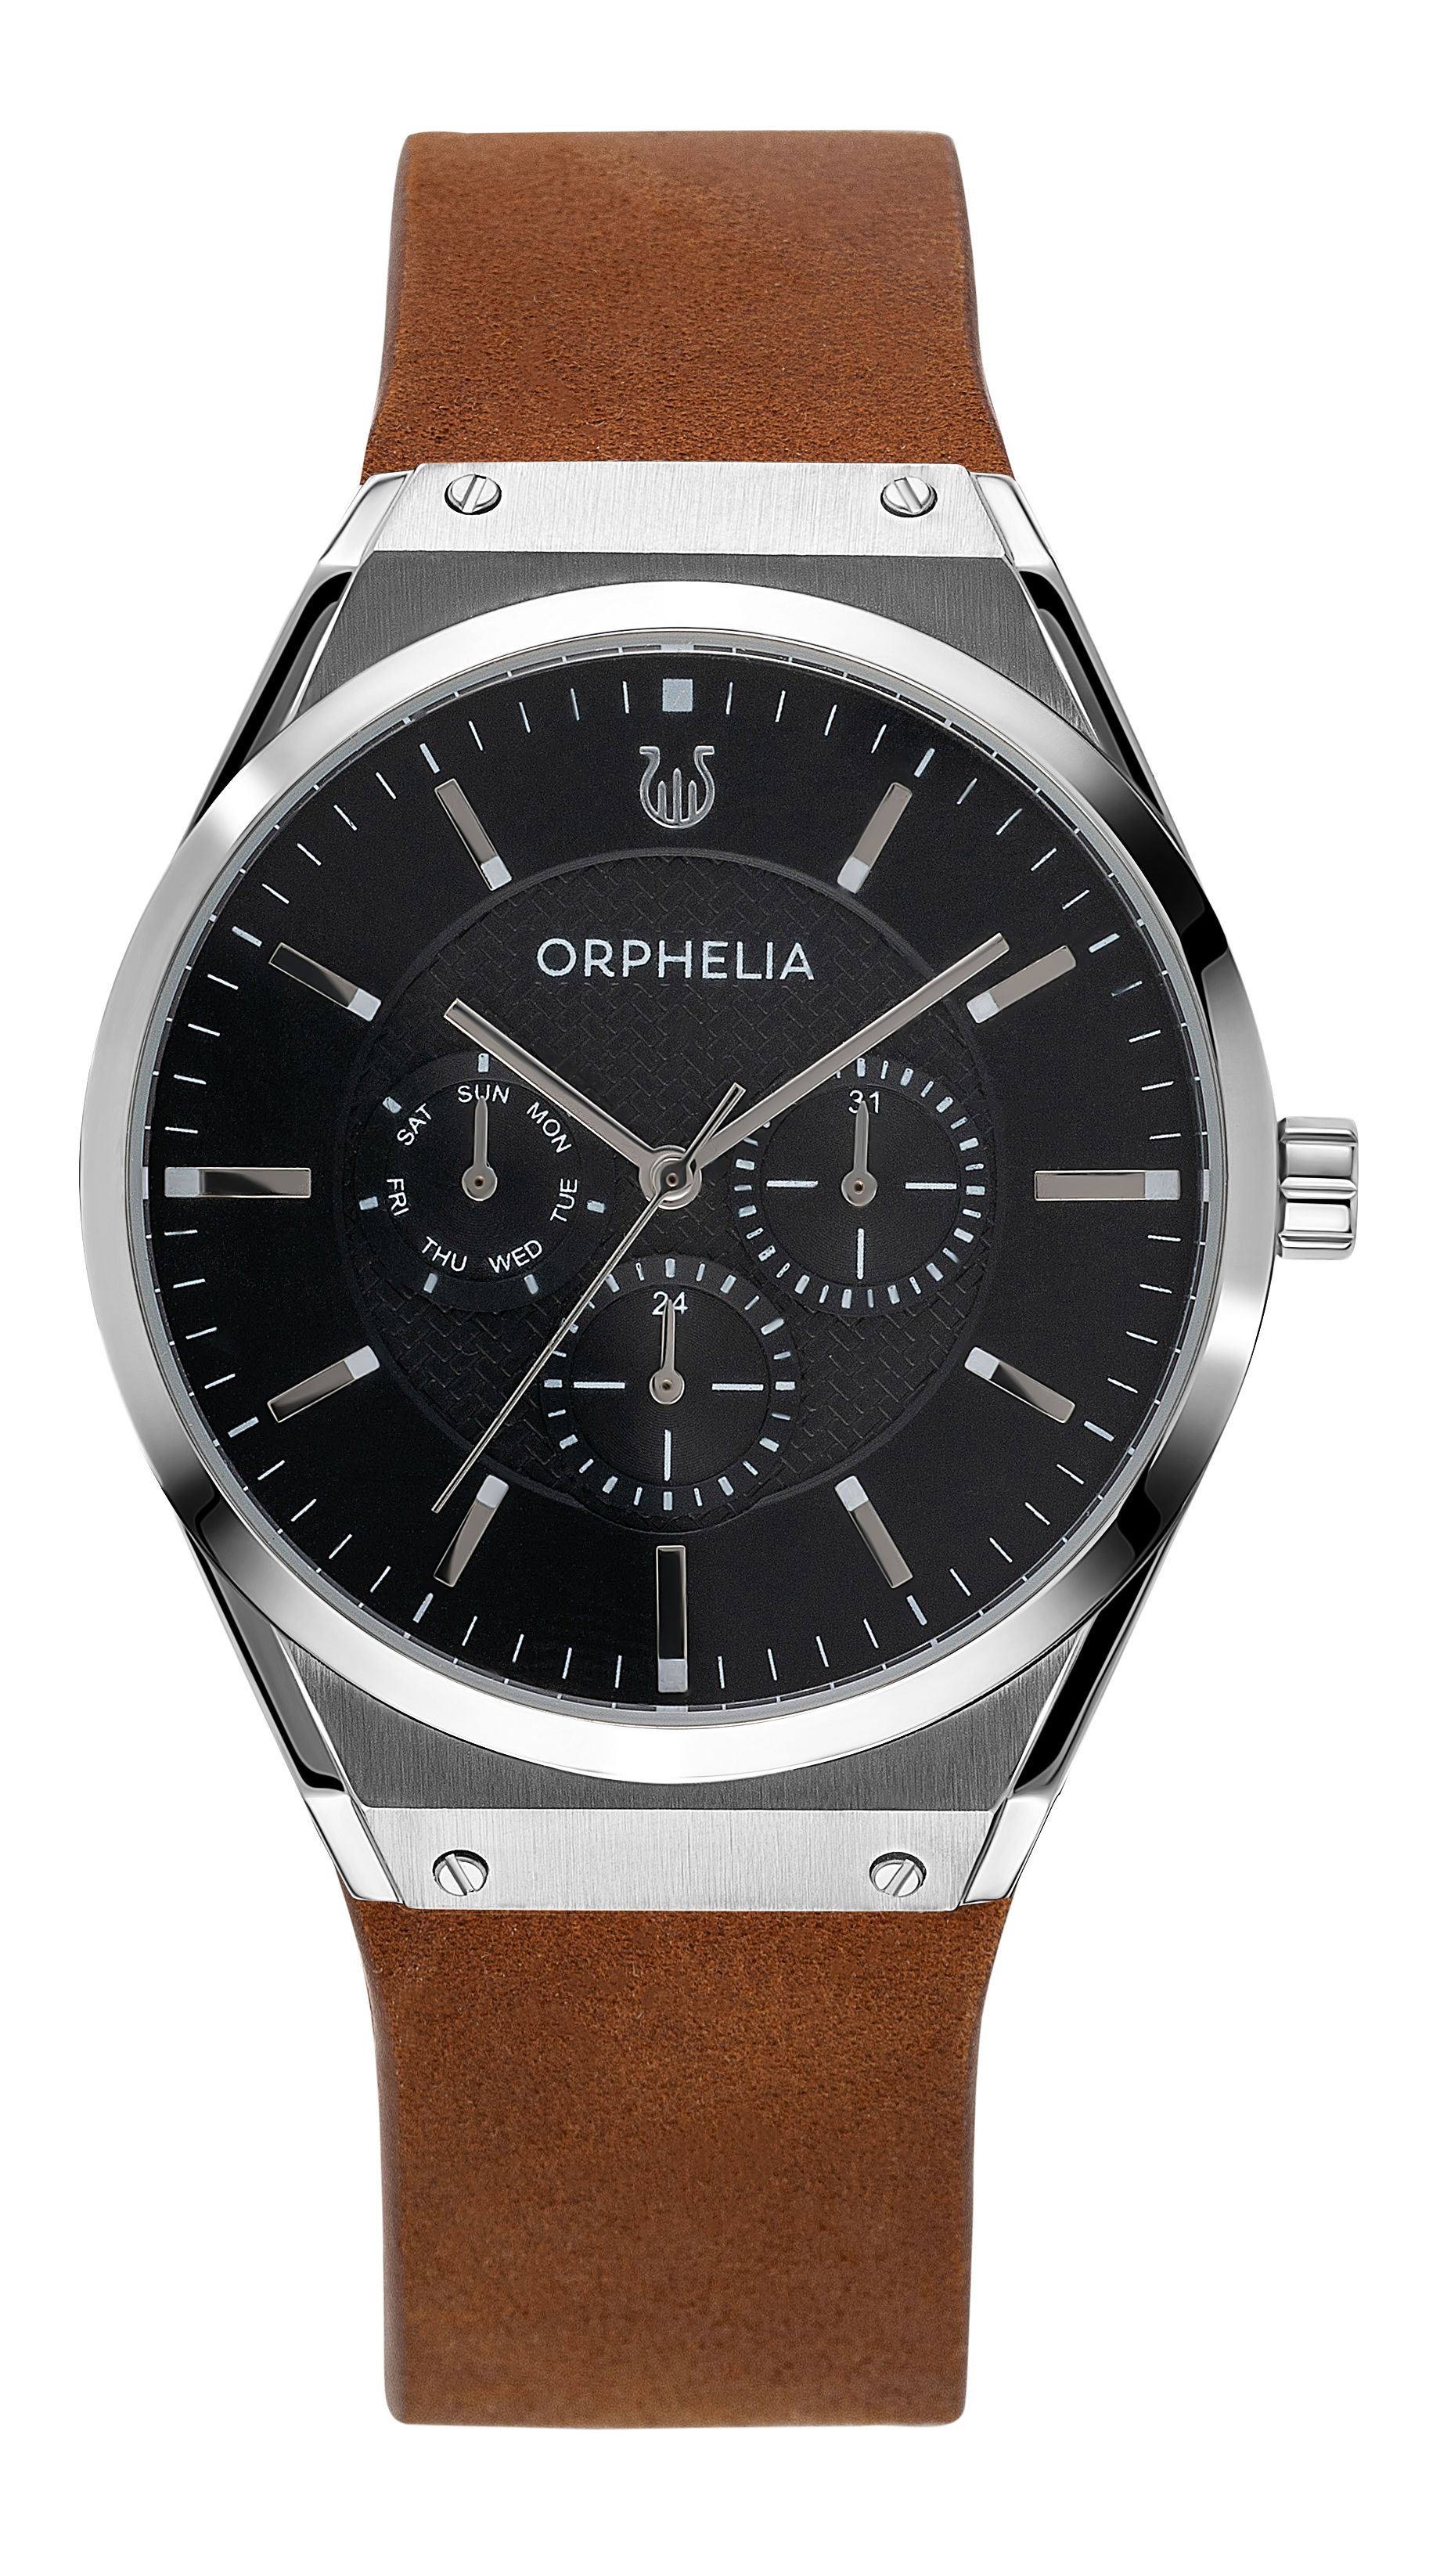 This Orphelia Saffiano Multi Dial Watch for Men is the perfect timepiece to wear or to gift. It's Silver 41 mm Round case combined with the comfortable Brown Genuine Leather watch band will ensure you enjoy this stunning timepiece without any compromise. Operated by a high quality Quartz movement and water resistant to 3 bars, your watch will keep ticking. GREAT DESIGN: ORPHELIA Saffiano Multi dial watch with a Miyota Quartz movement includes a date display and has a very comfortable genuine leather strap. This watch features a 24 hour display. perfect for parties, date nights and wearing in the office. PREMIUM QUALITY: By using high-quality materials  Glass: Mineral Glass  Case material: Stainless steel  Bracelet material: Leather - Water resistant: 3 bars COMPACT SIZE: Case diameter: 41 mm  Height: 9 mm  Strap- Length: 22 cm  Width: 20 mm. Due to this practical handy size  the watch is absolutely for everyday use-Weight: 61 g